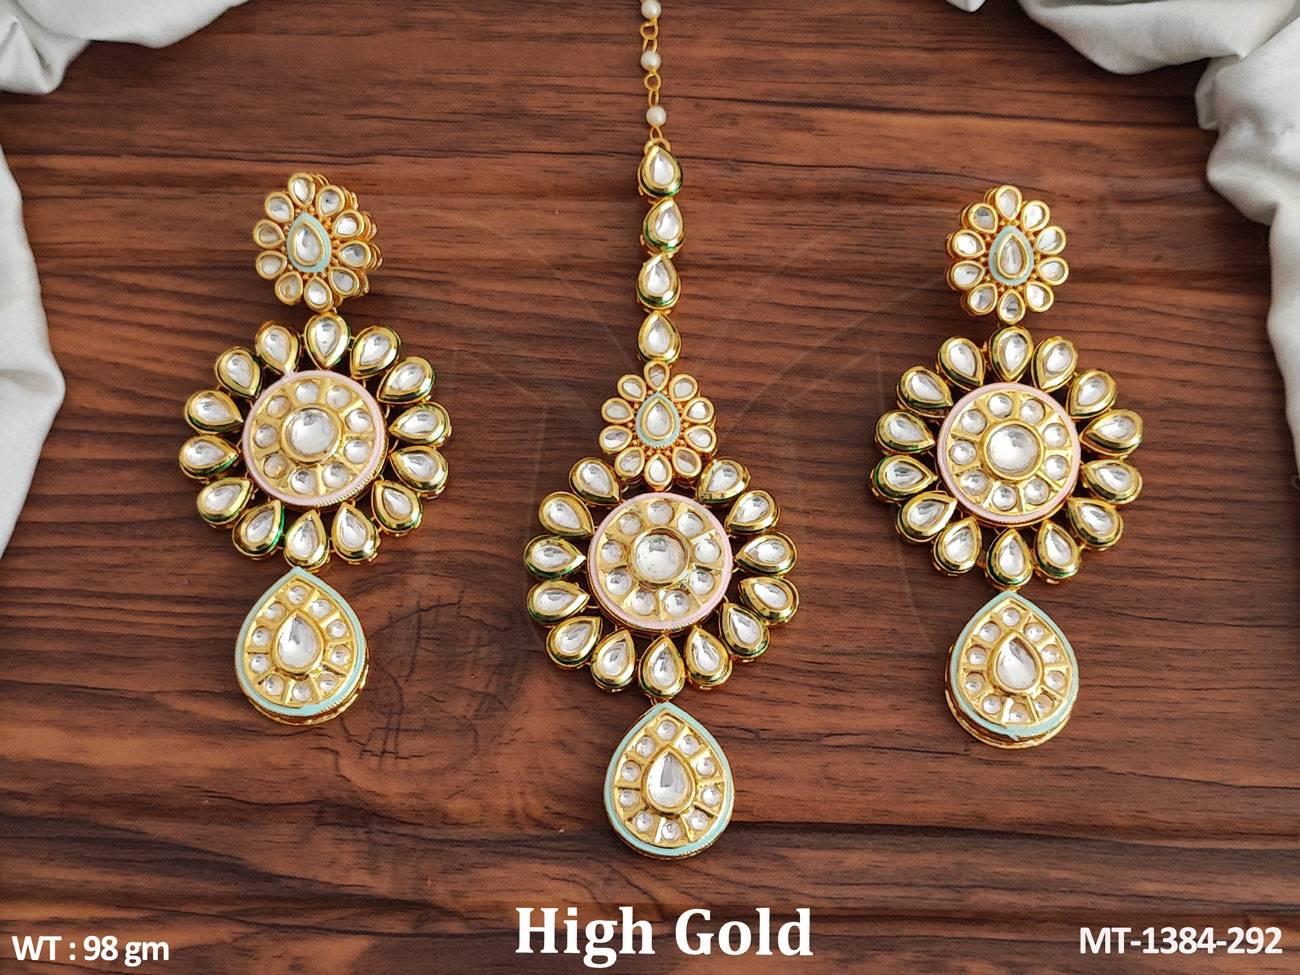 This fancy design kundan maang tikka with earrings set is crafted with high-quality brass metal and is elegantly polished with high gold.